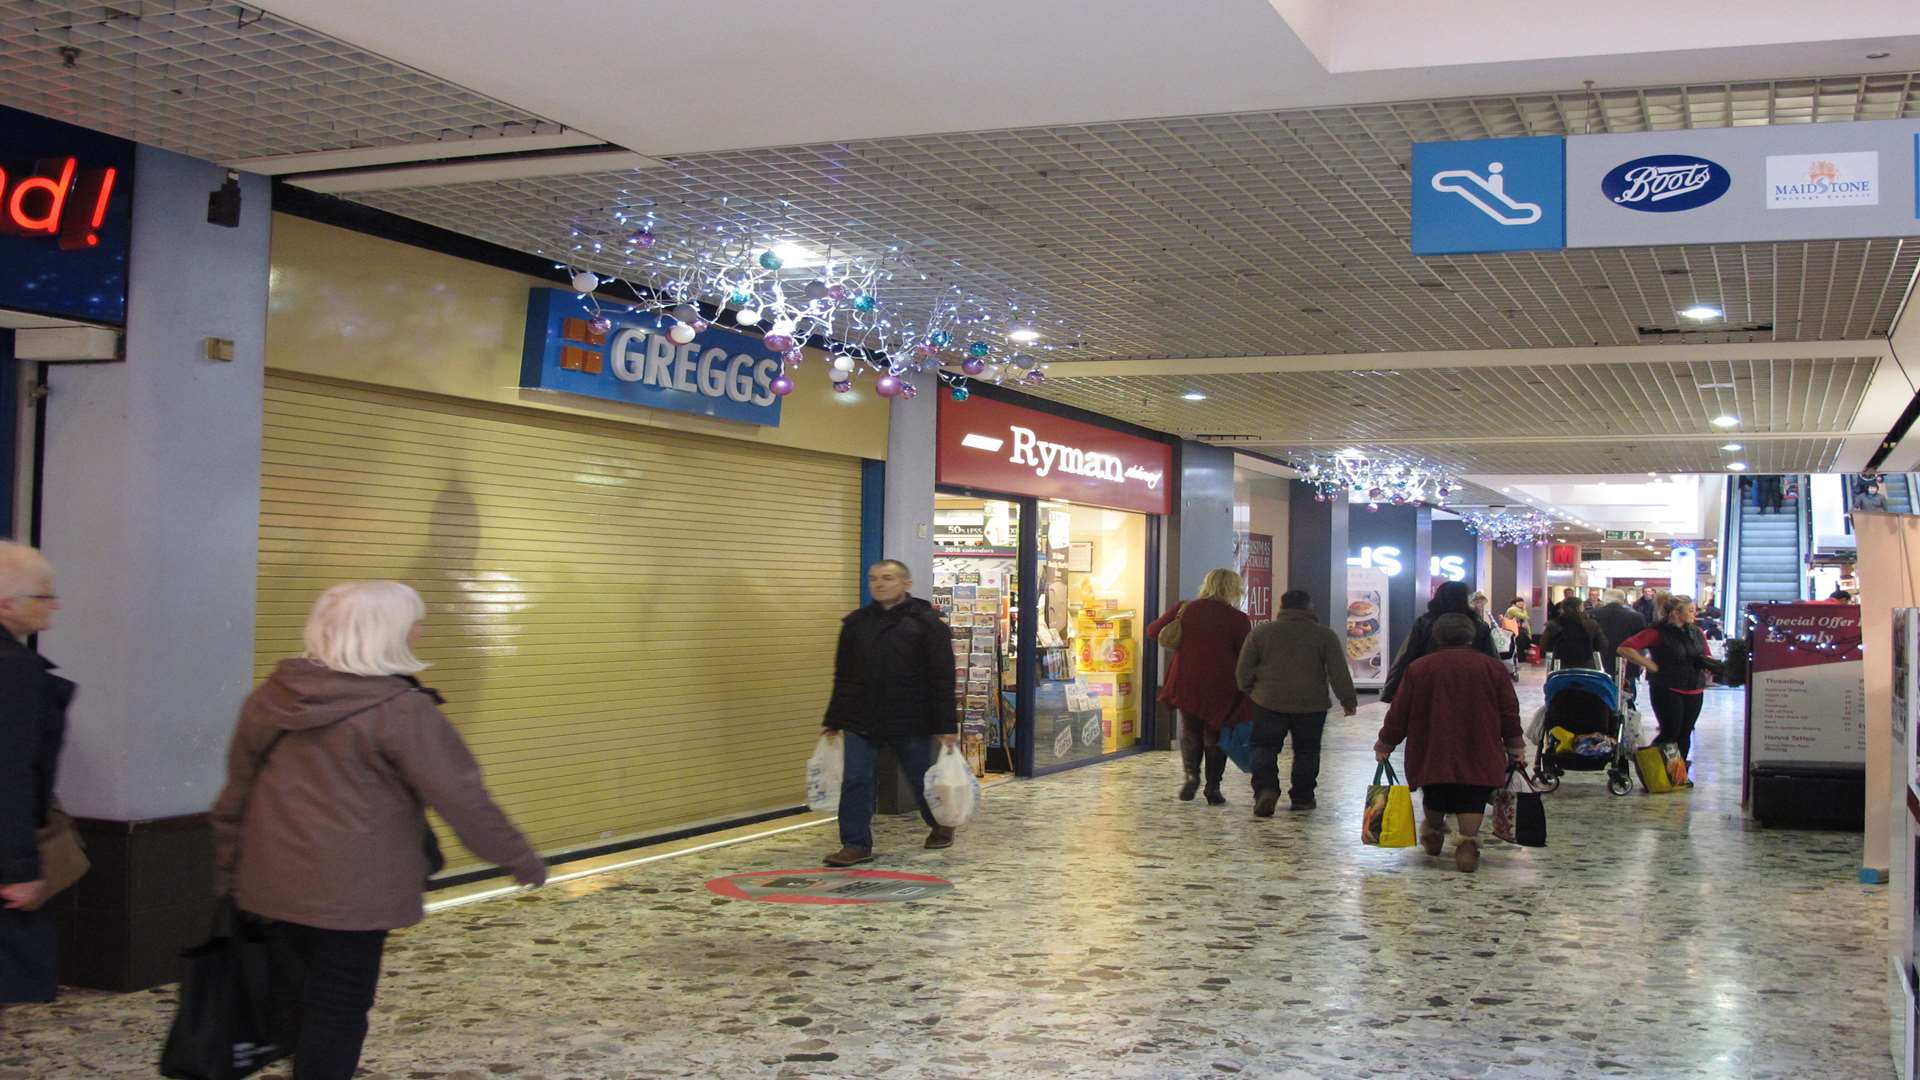 A mouse reportedly fell through the ceiling at Greggs in The Mall